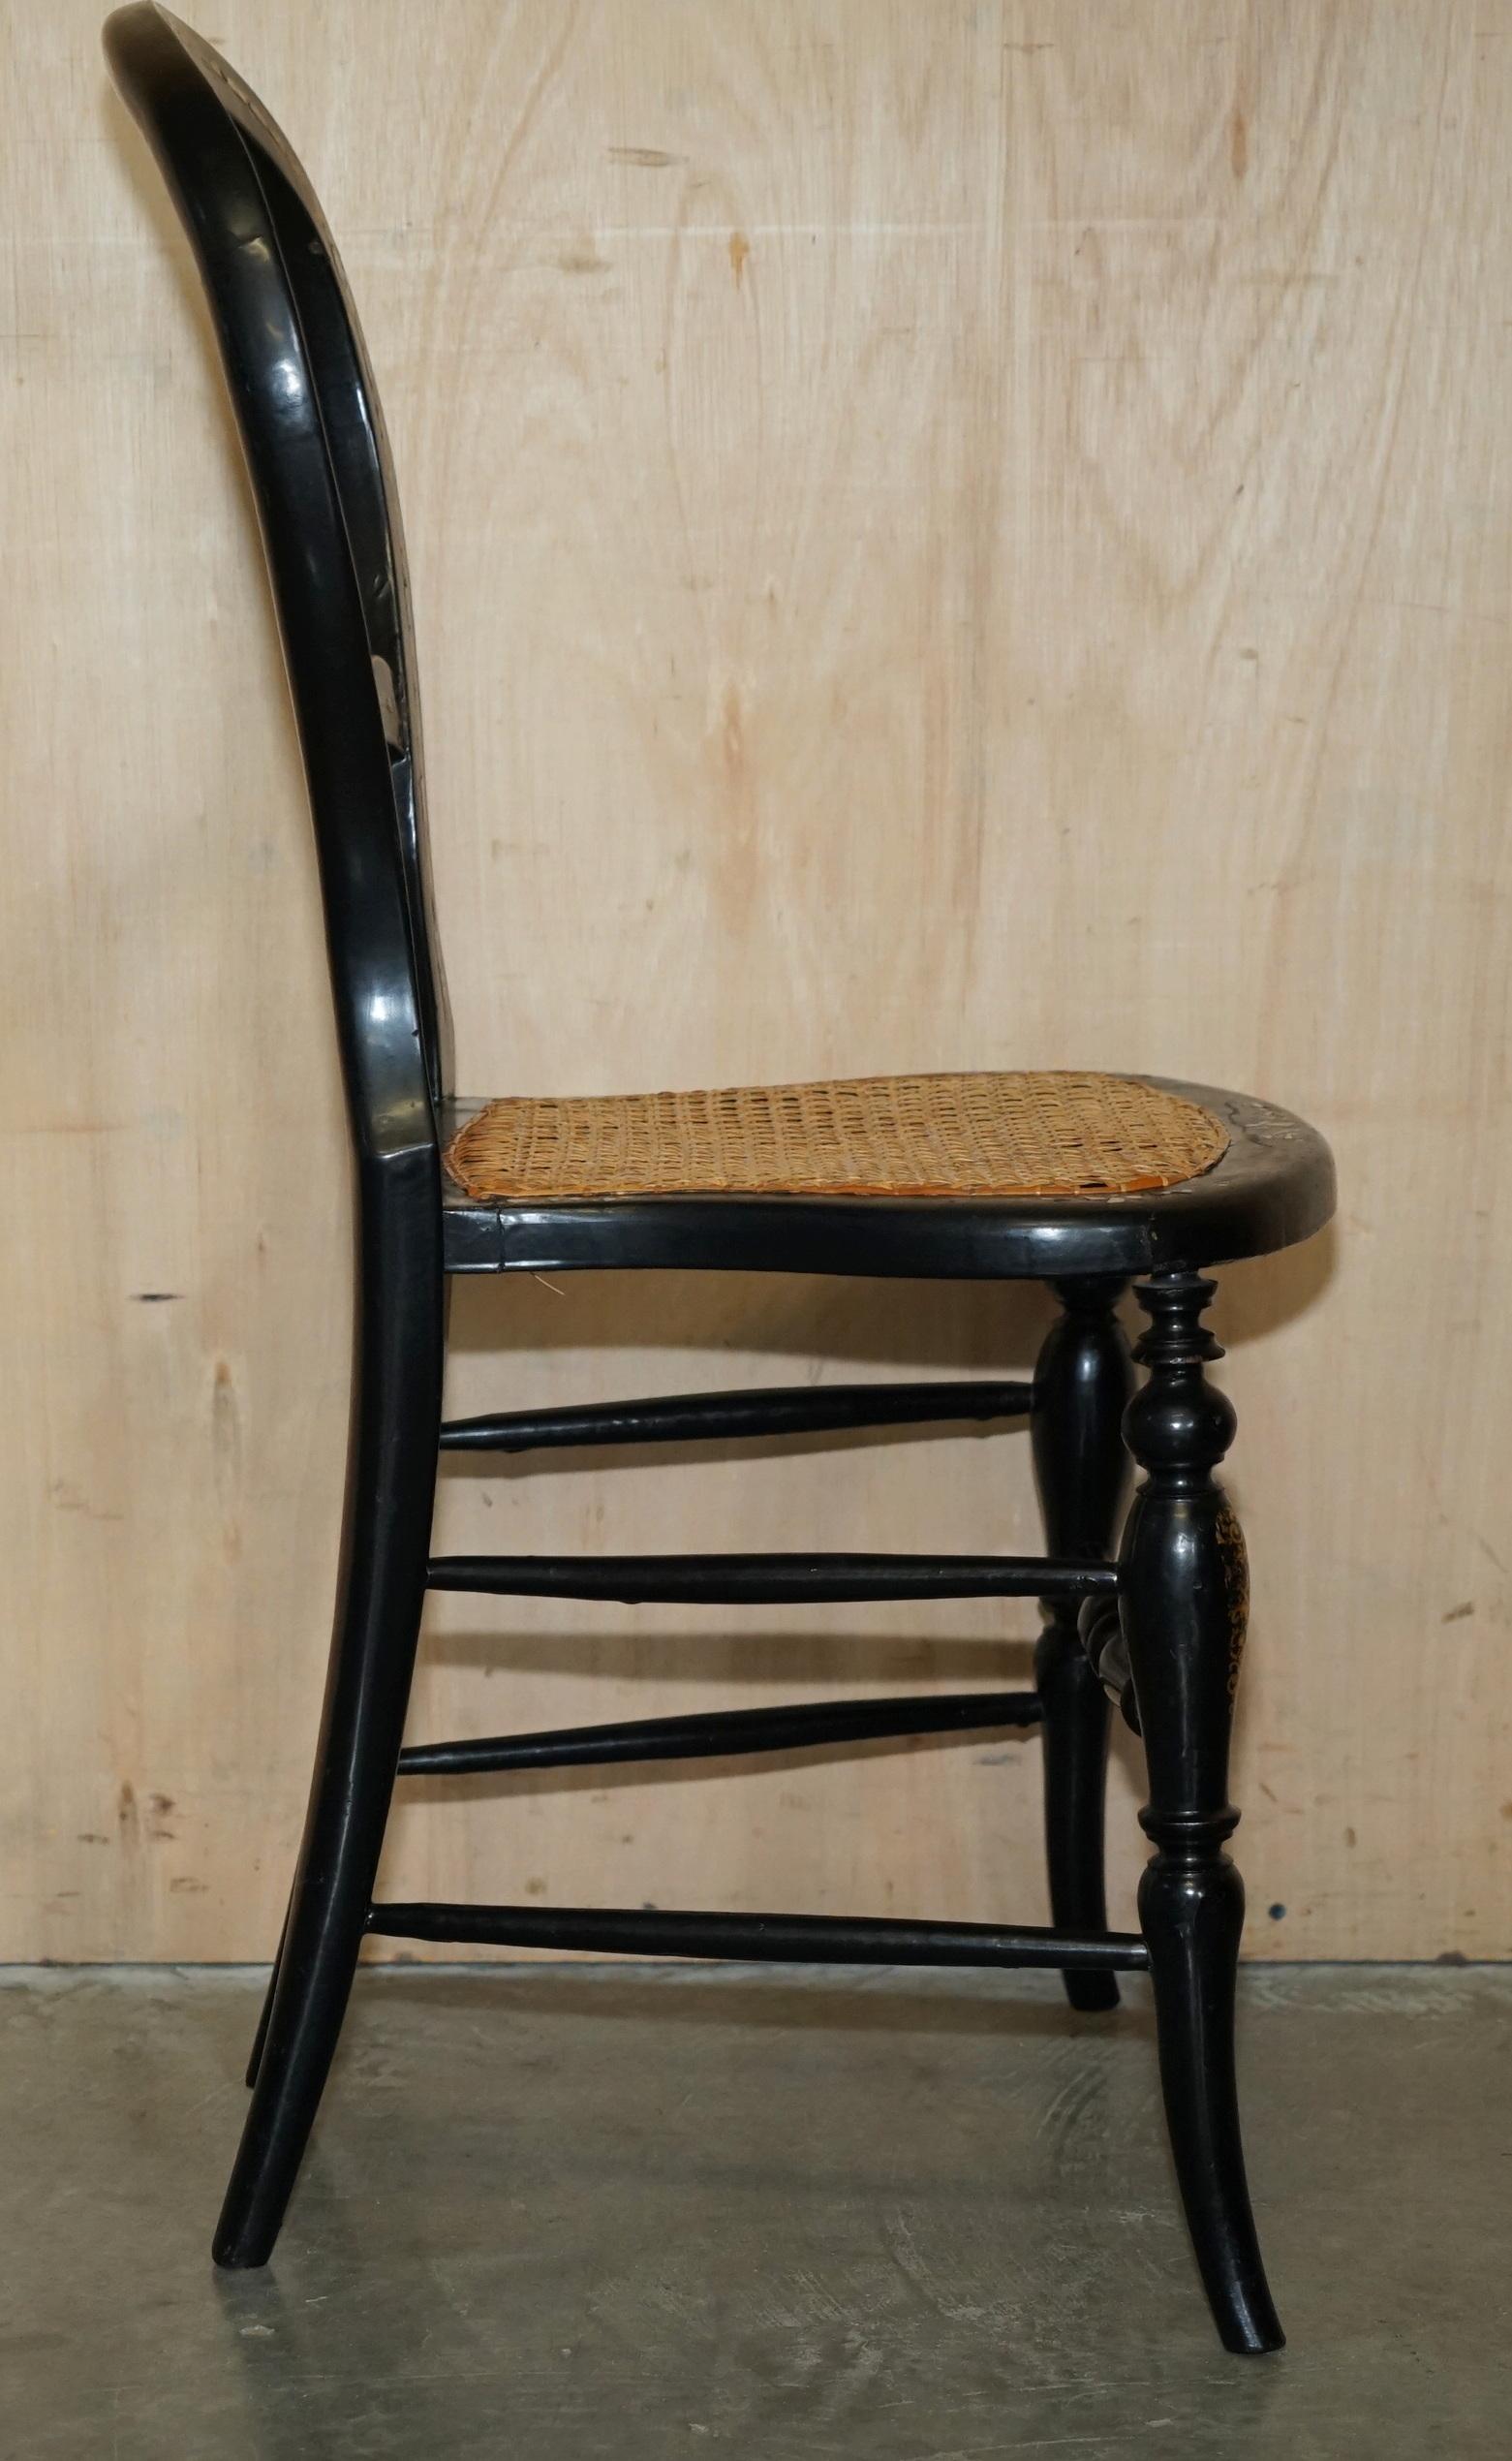 VIER FINE UND ANTIQUE REGENCY BERGERE MOTHER OF PEARL EBONISED SIDE CHAIRs im Angebot 5